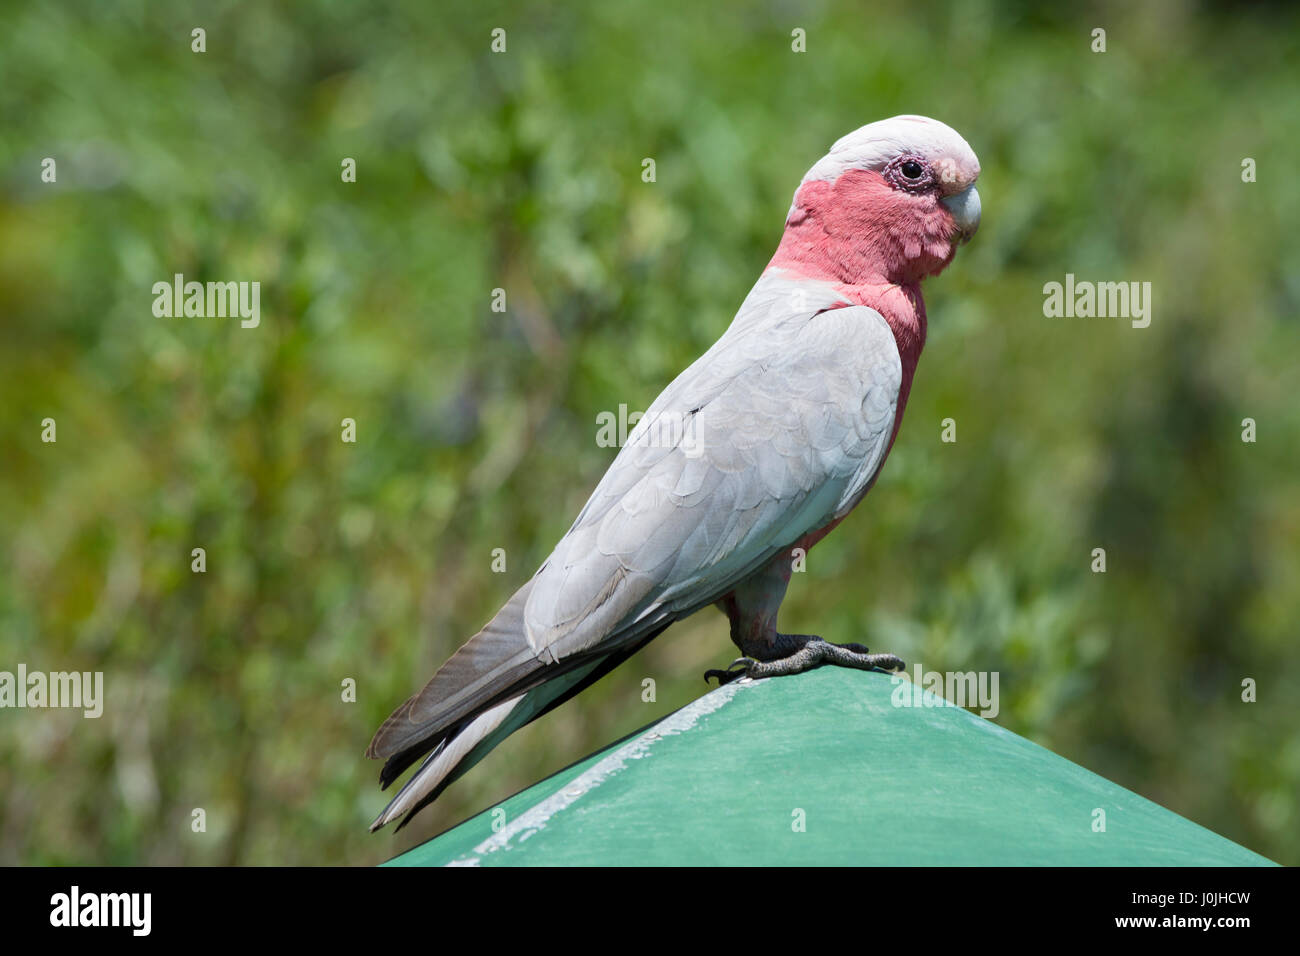 Wild Galah (Eolophus roseicapilla) also known as the rose-breasted cockatoo and roseate cockatoo. Stock Photo